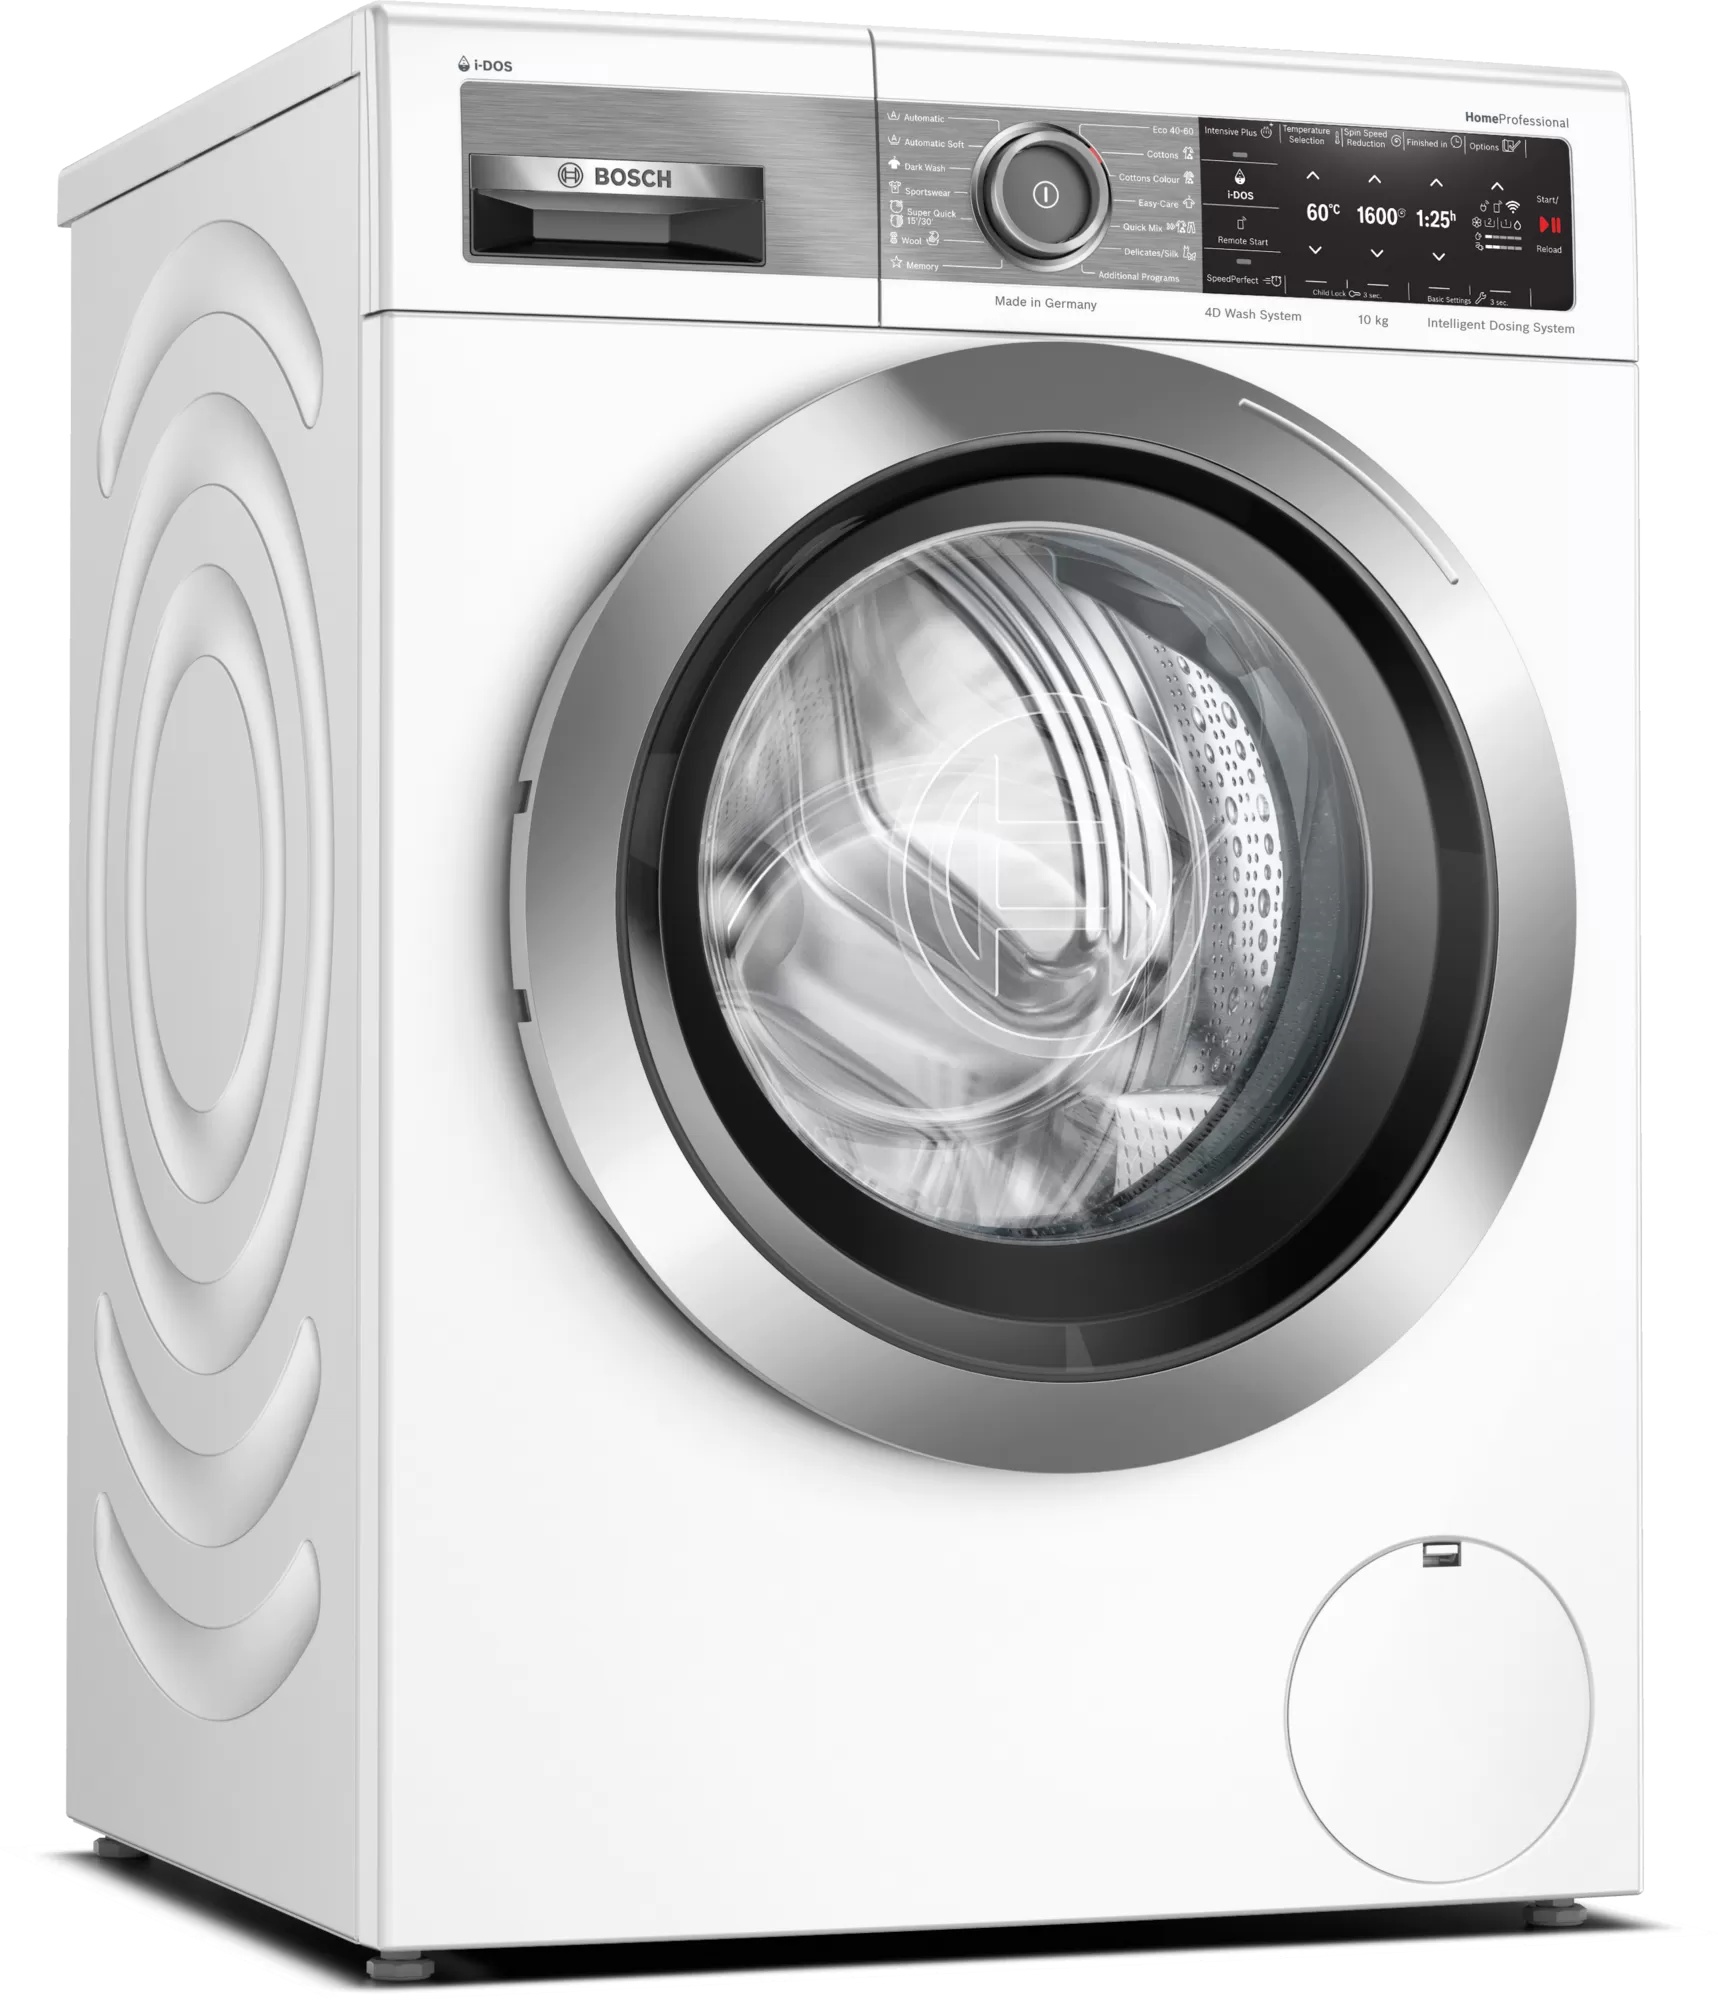 Masina de spalat rufe Bosch WAX32EH0BY HomeProfessional 10kg 1600 rpm i-DOS Home Connect clasa C alb 10kg